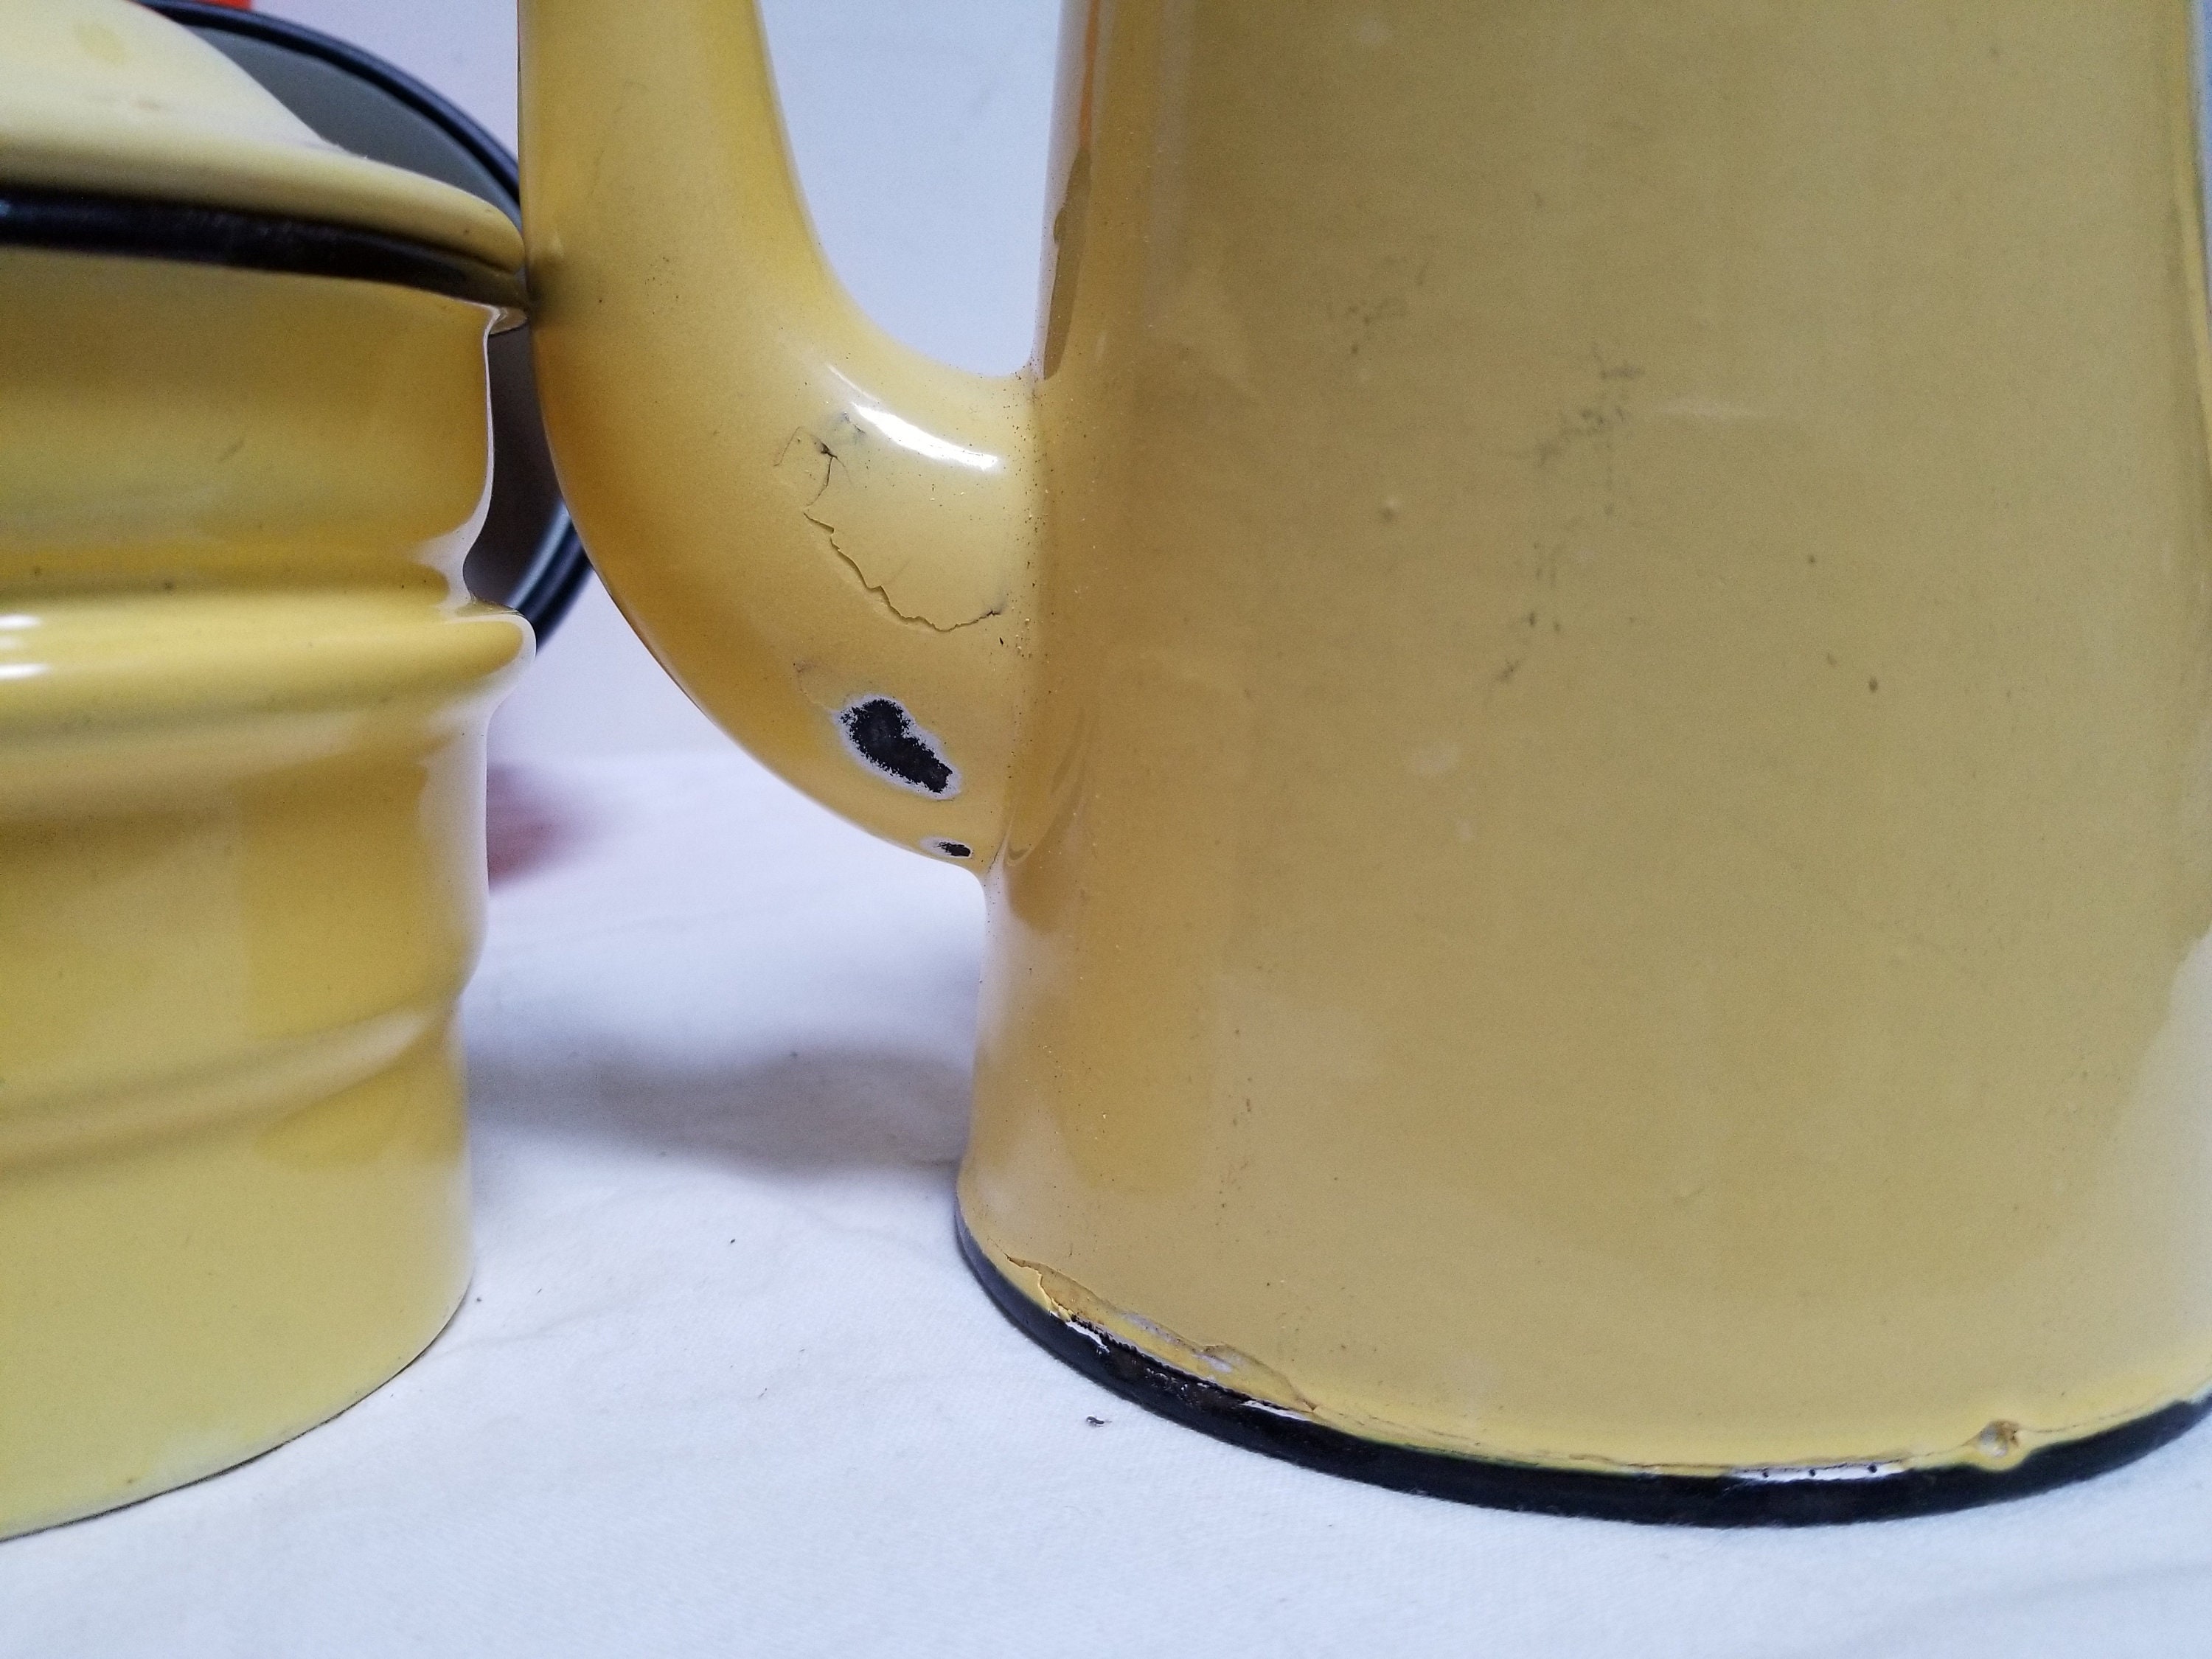 1940s French Enamel Yellow Coffee Maker. French Vintage Kitchen